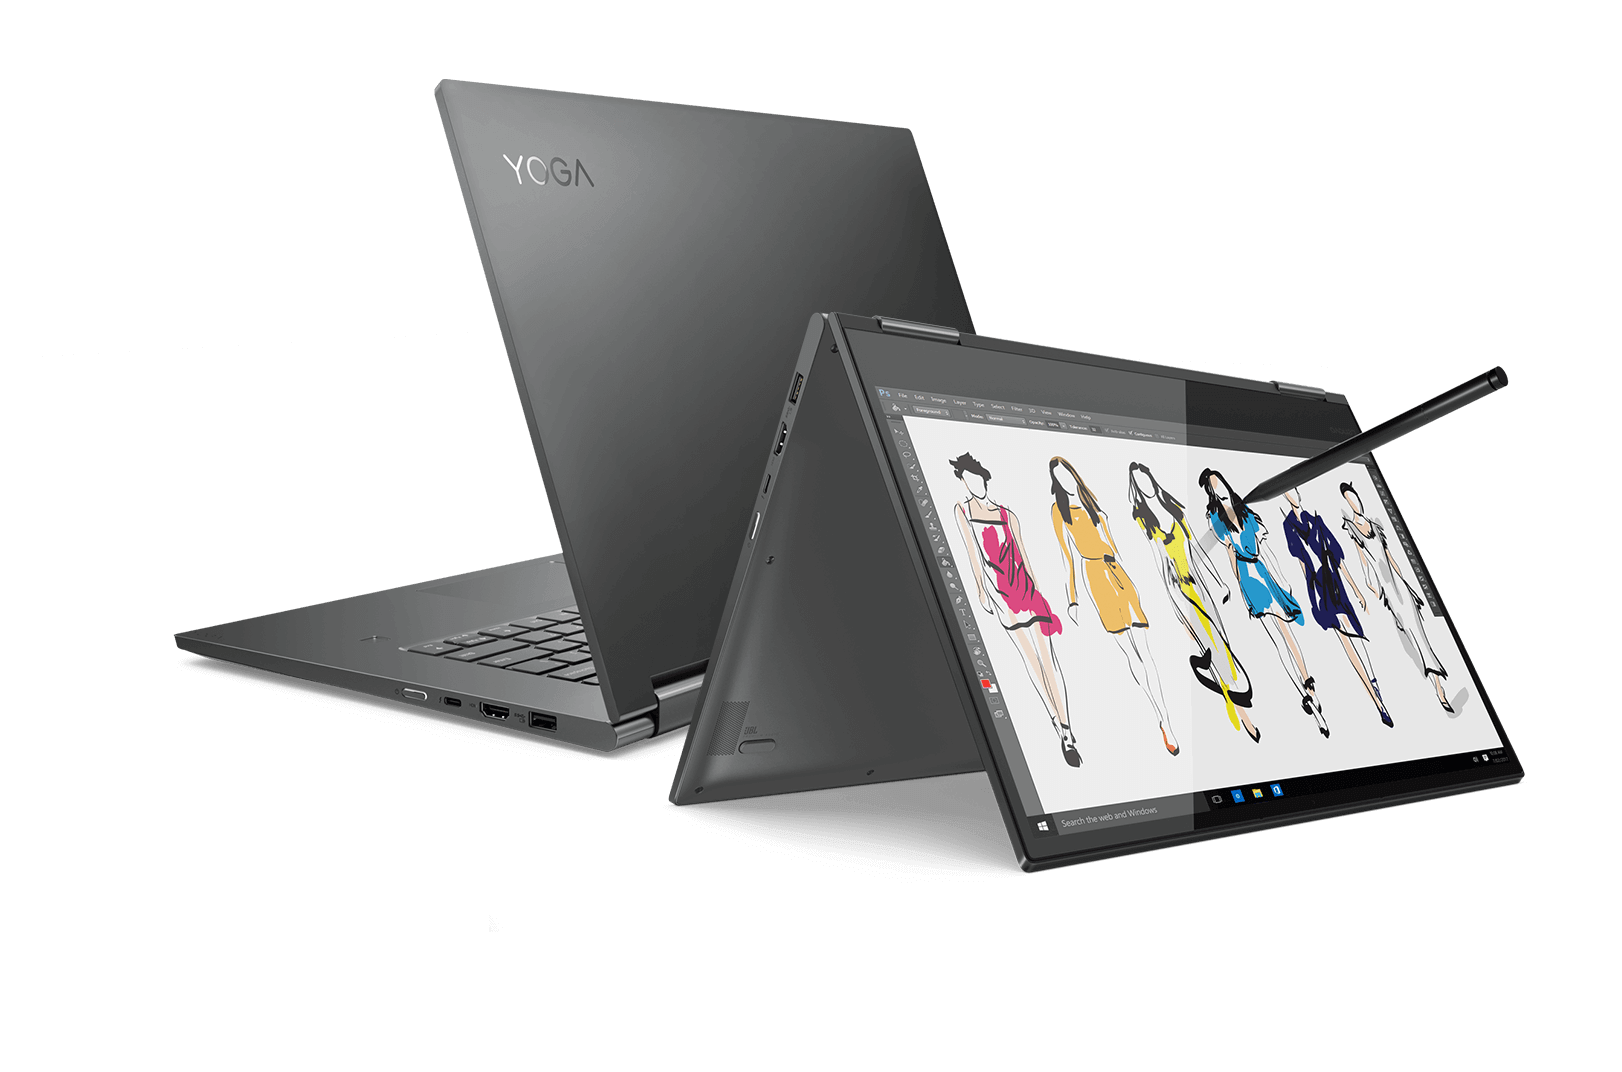 Lenovo Yoga 700 Series Laptop Front and Back Views